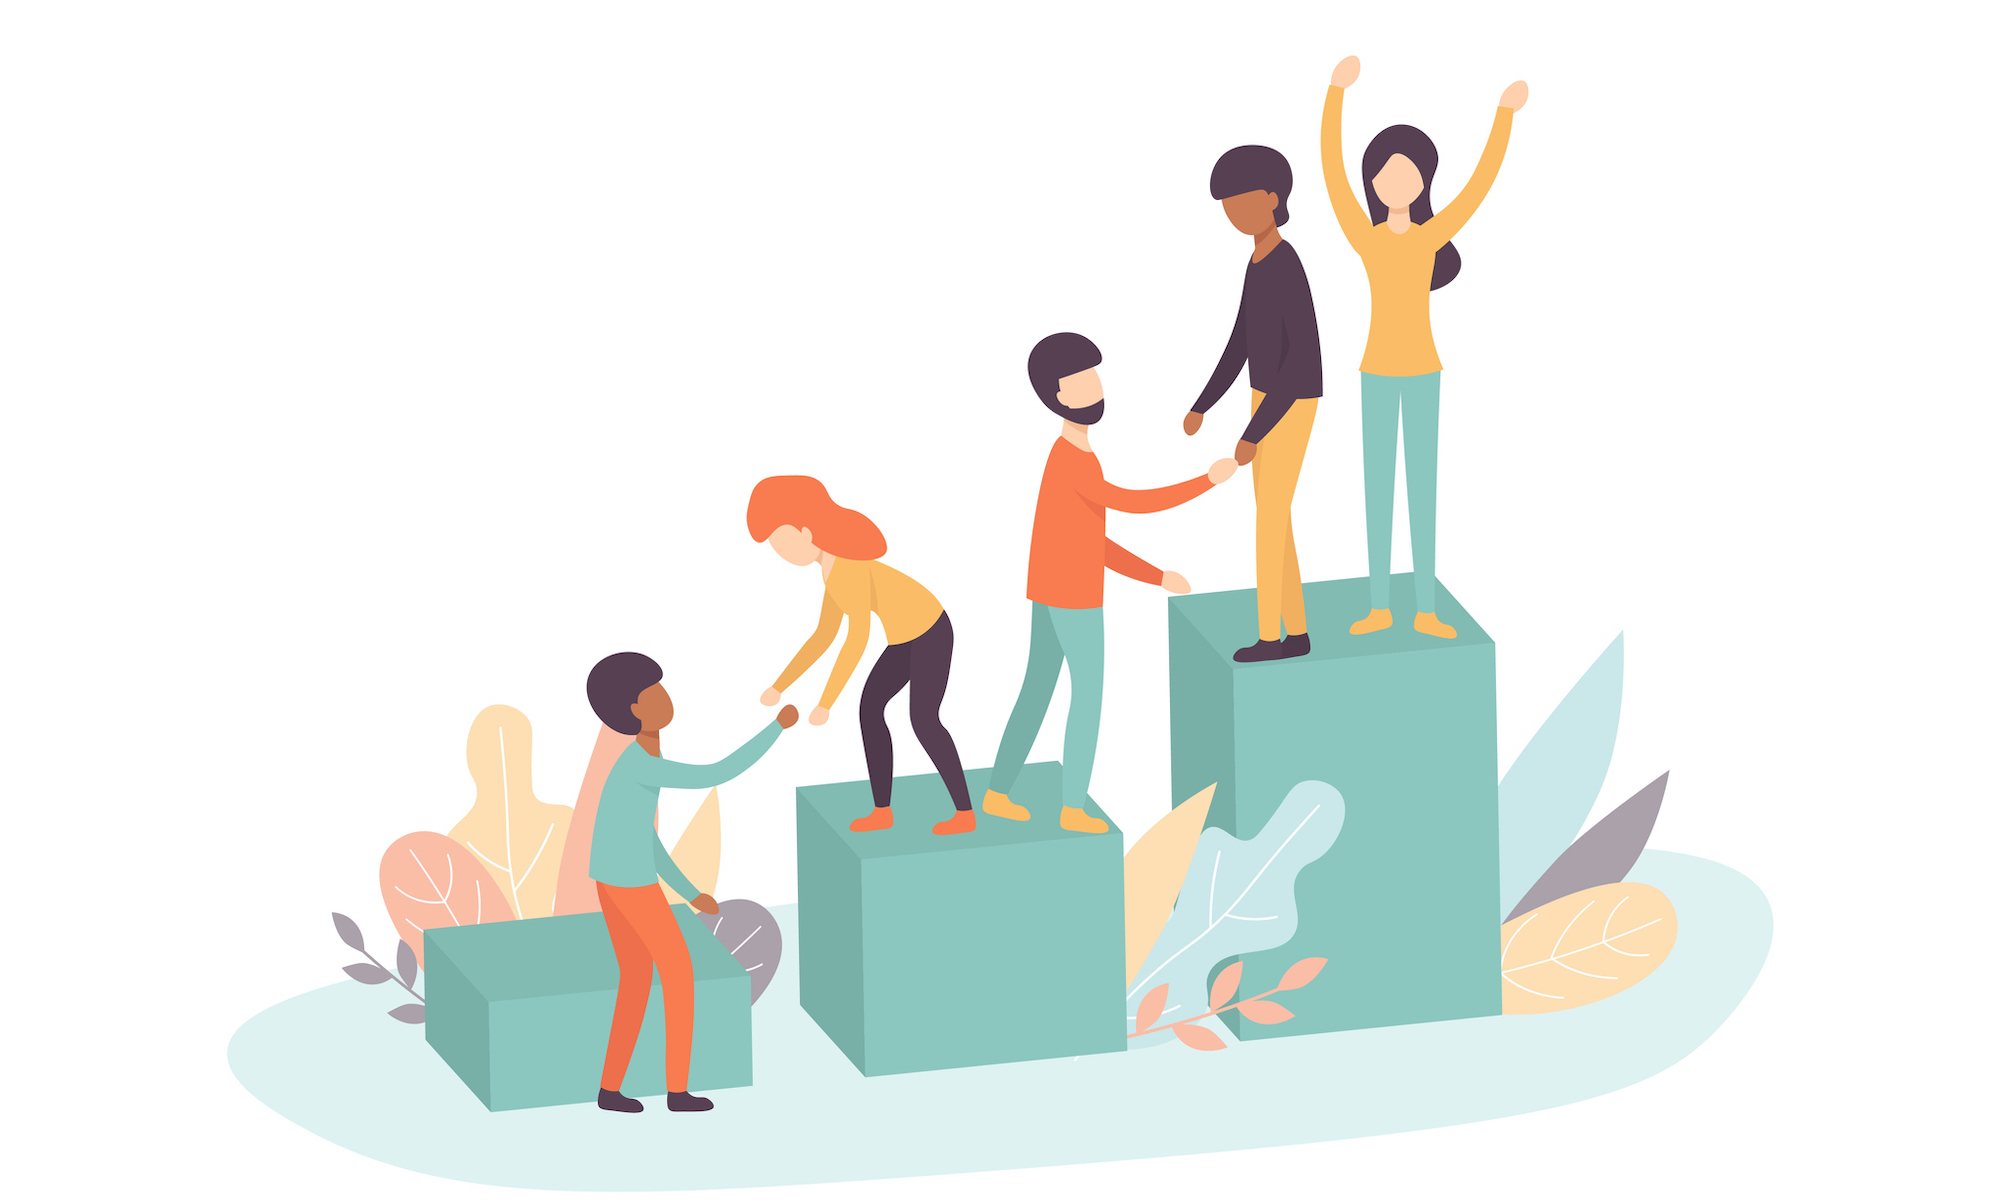 An illustration of people helping each other move from small pedestal to medium pedestal to large pedestal, in an effort to demonstrate peers helping each other.